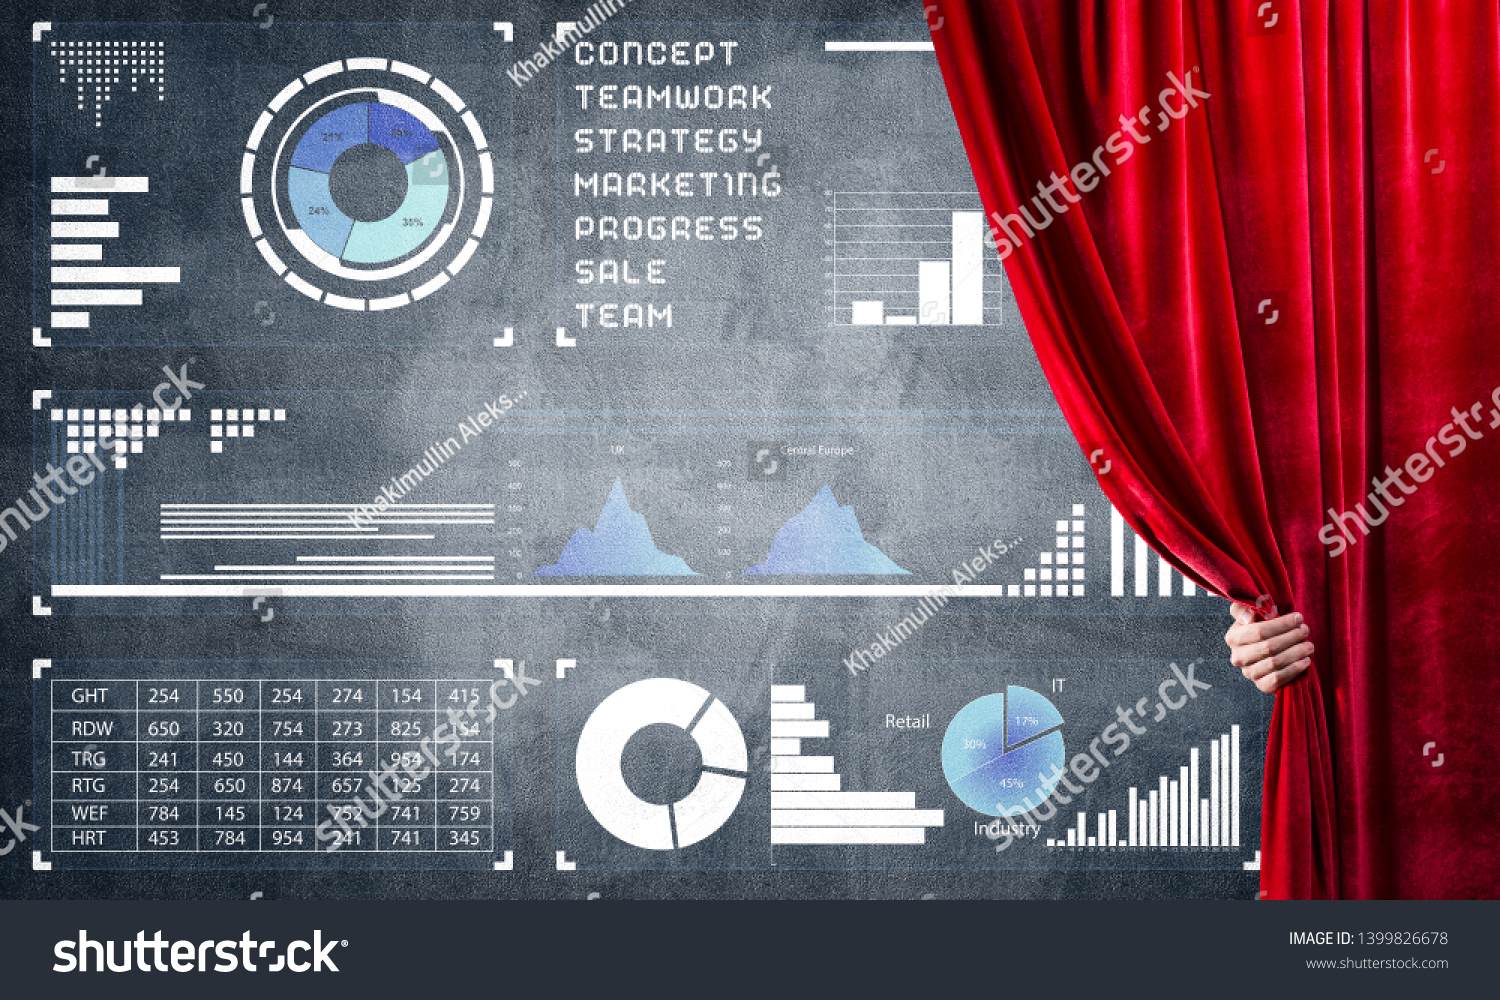 Hand opening red curtain and drawing business graphs and diagrams behind it #1399826678